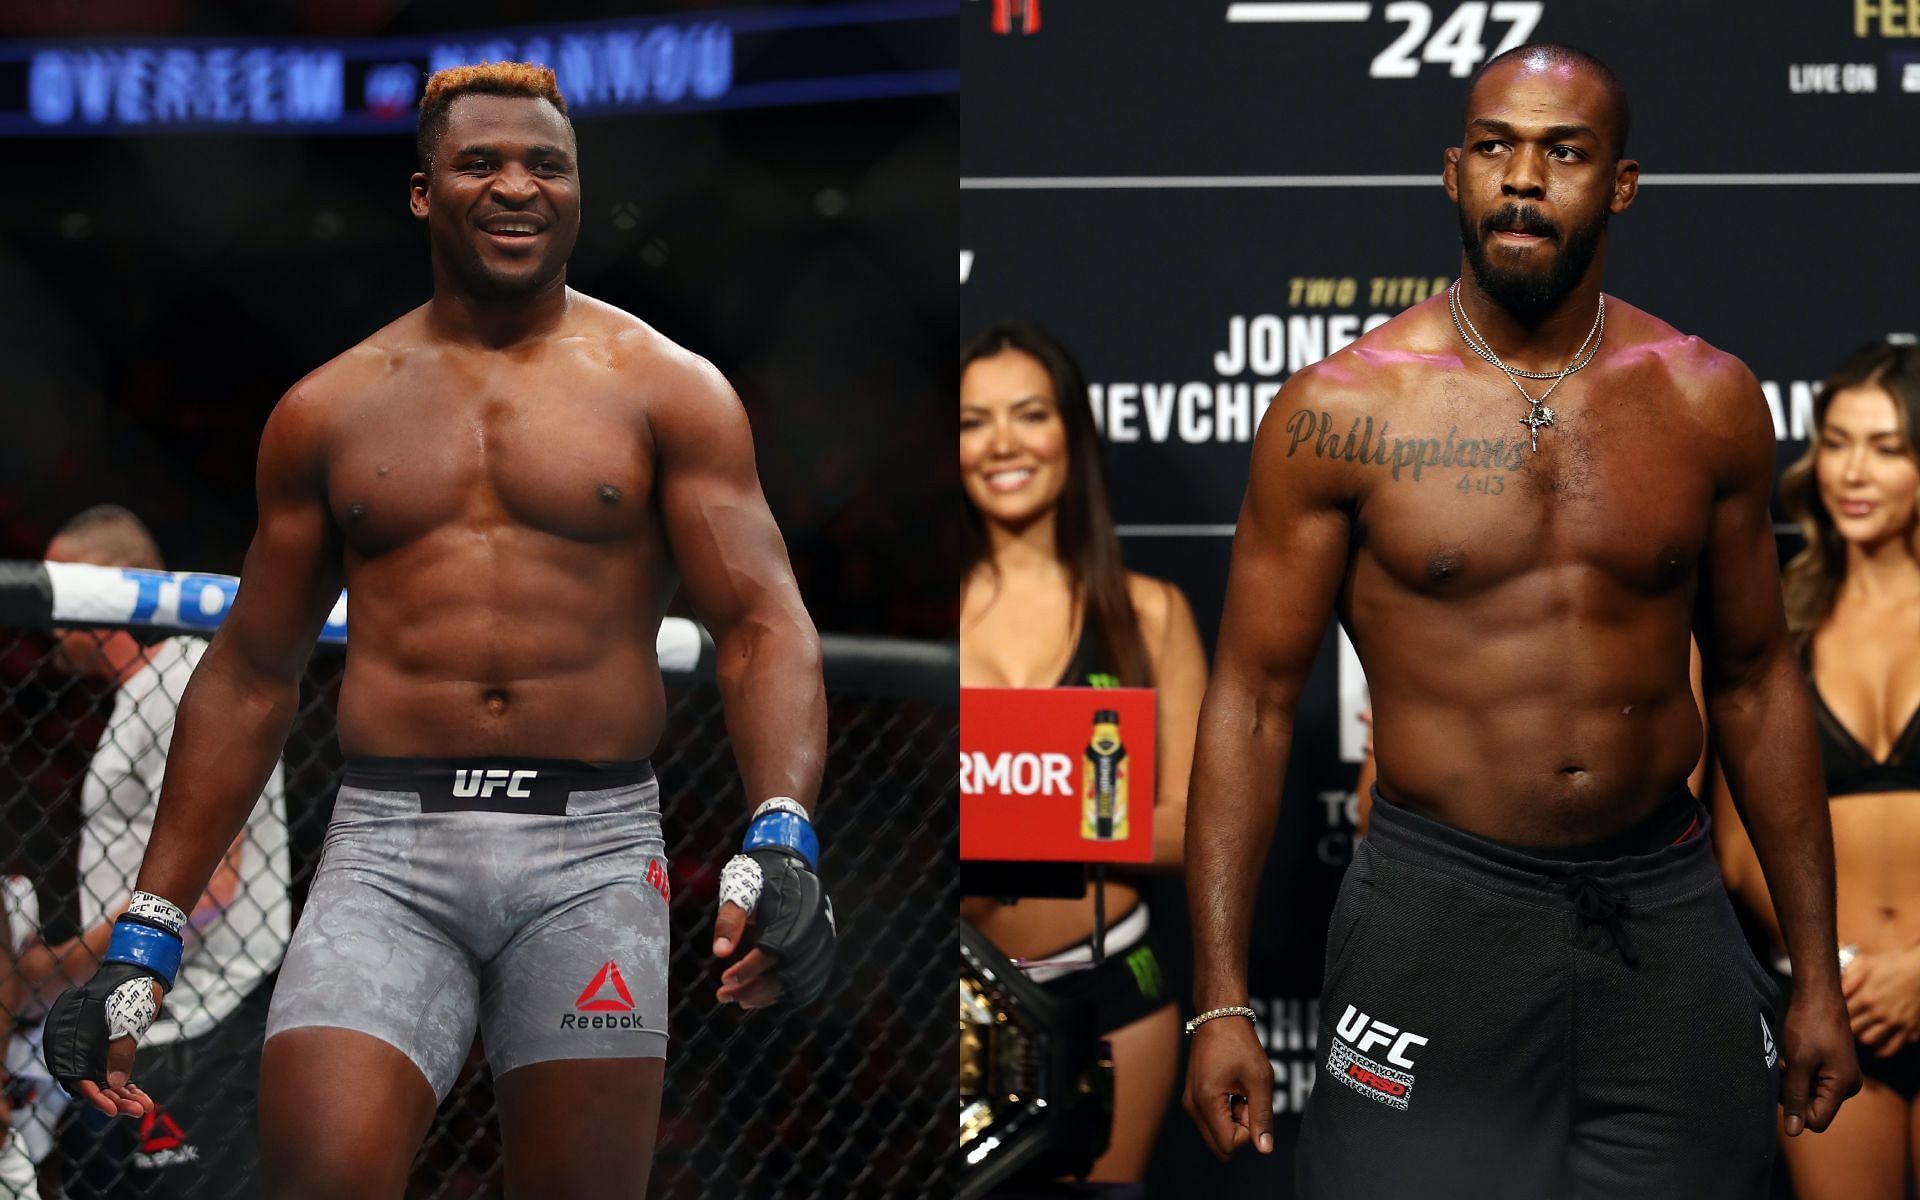 Francis Ngannou (left) and Jon Jones (right) [Image credits: Getty Images] 